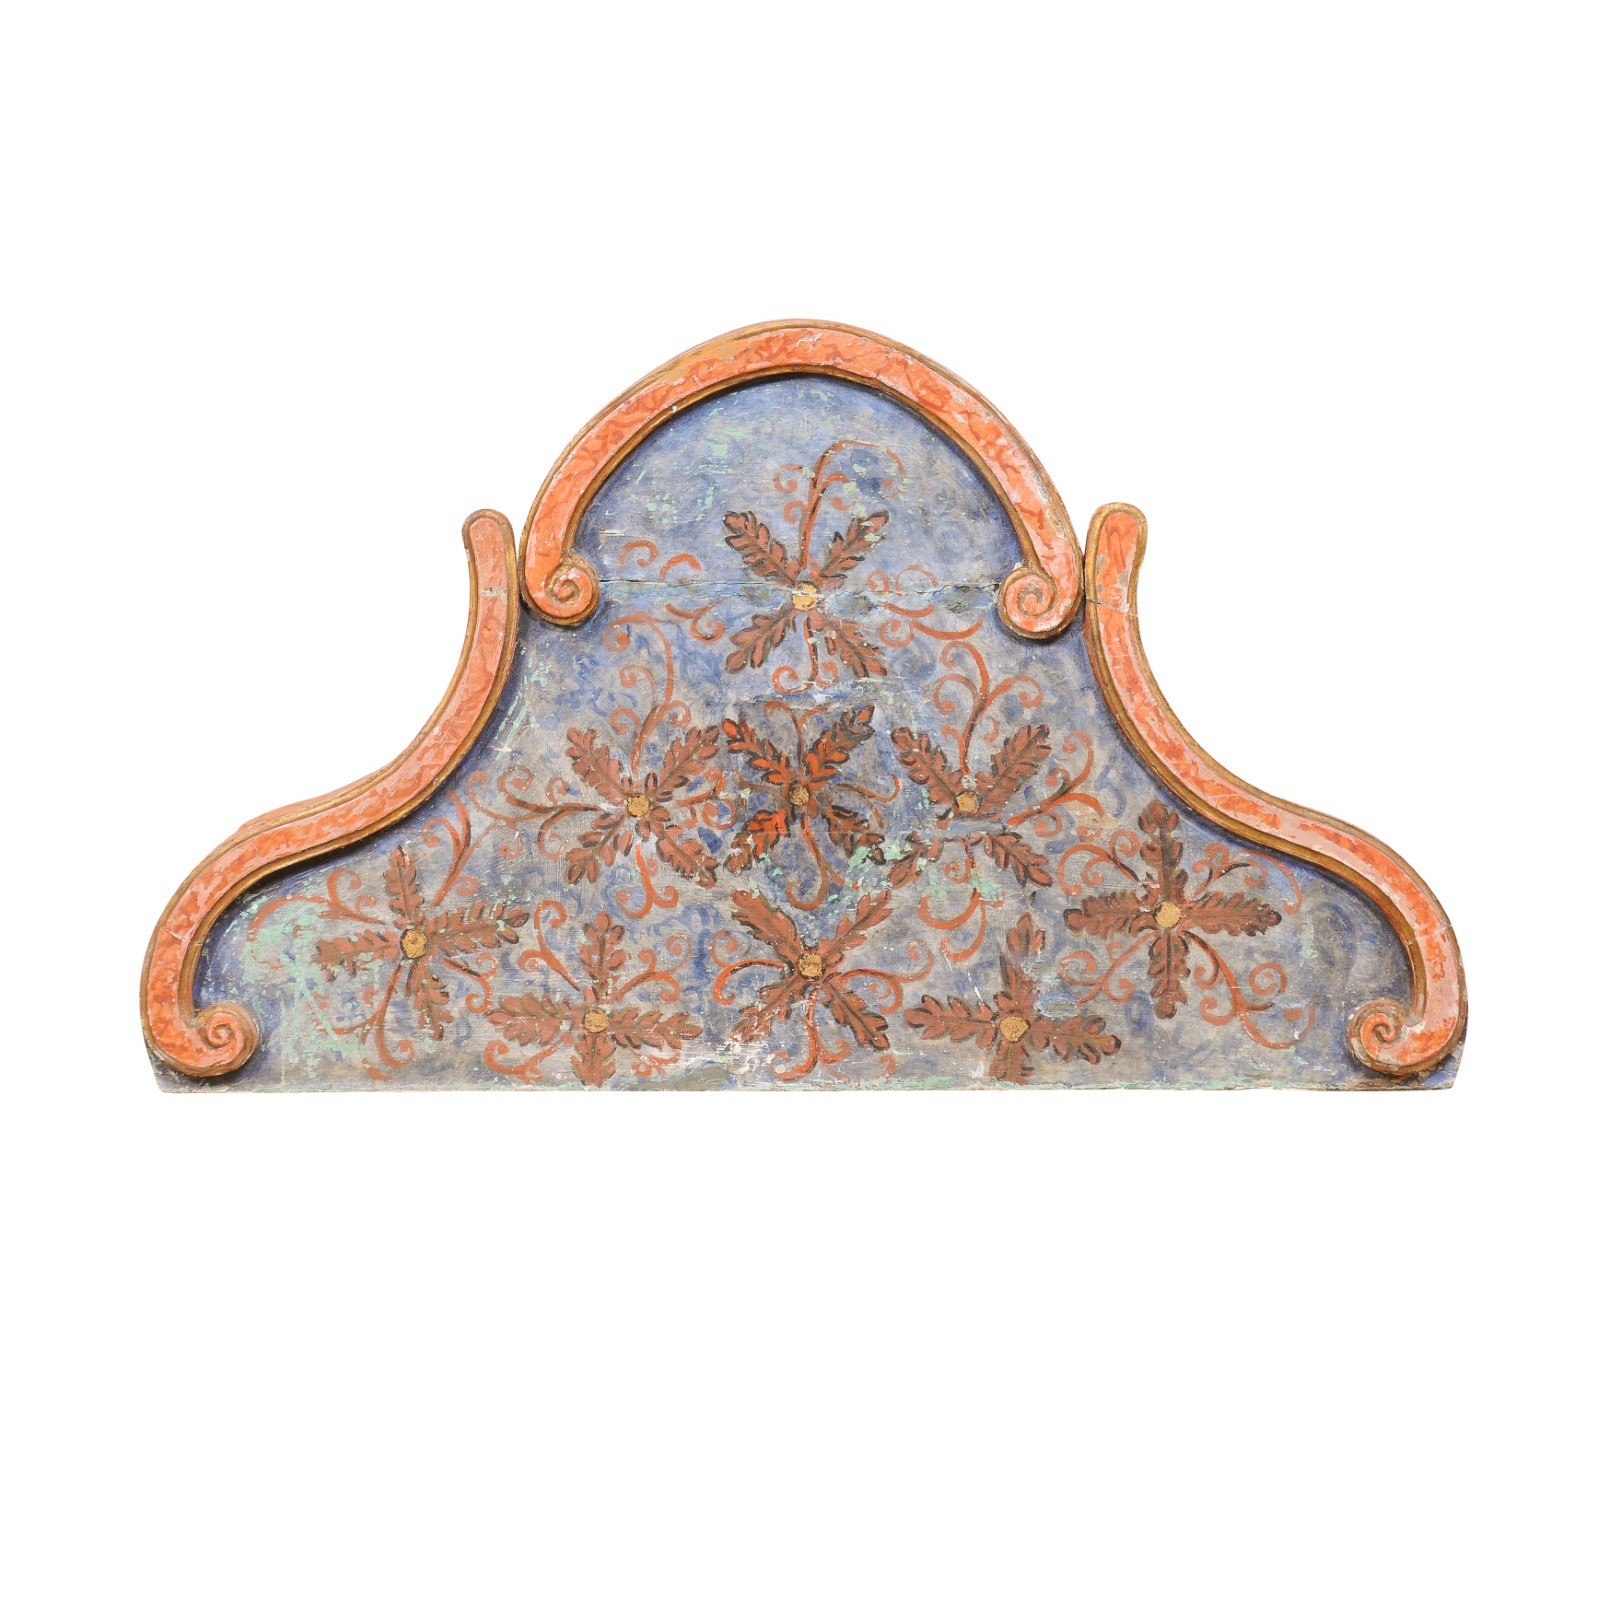 Spanish 19th c Floral-Painted Wall Pediment